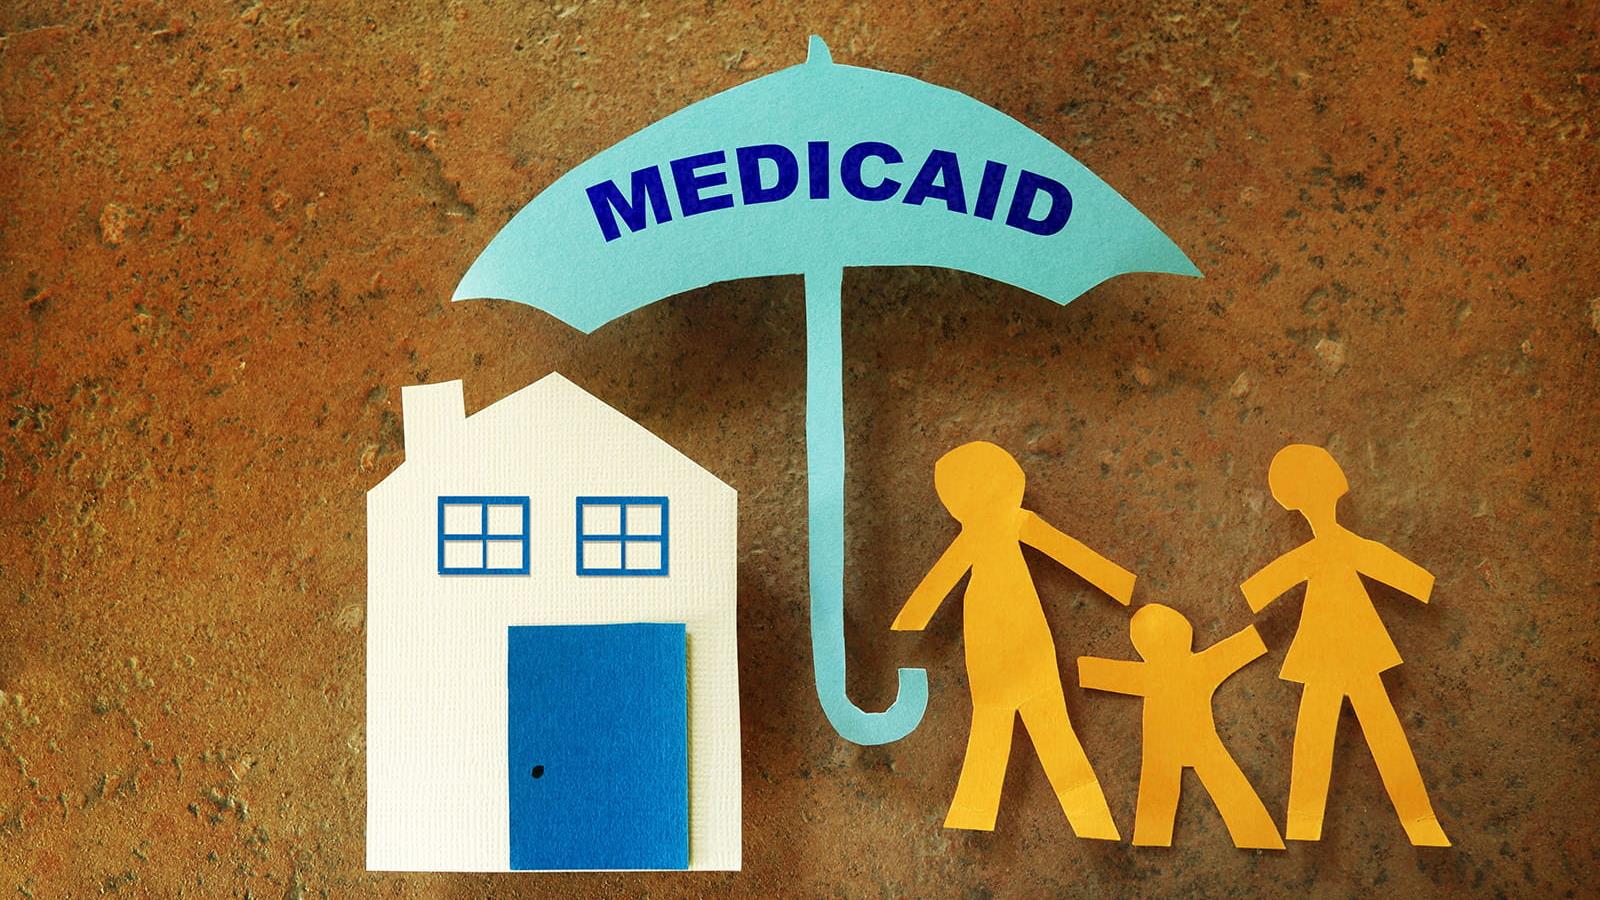 Paper cut outs of a home and family of three under a Medicaid umbrella